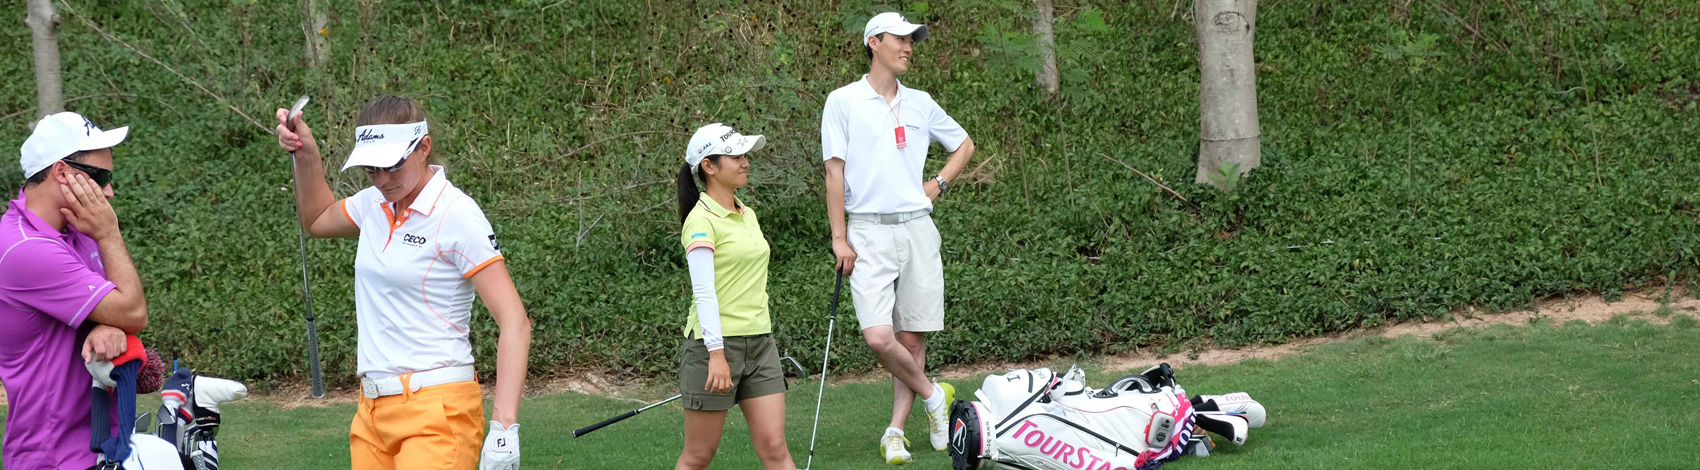 Golf Lessons in Hong Kong